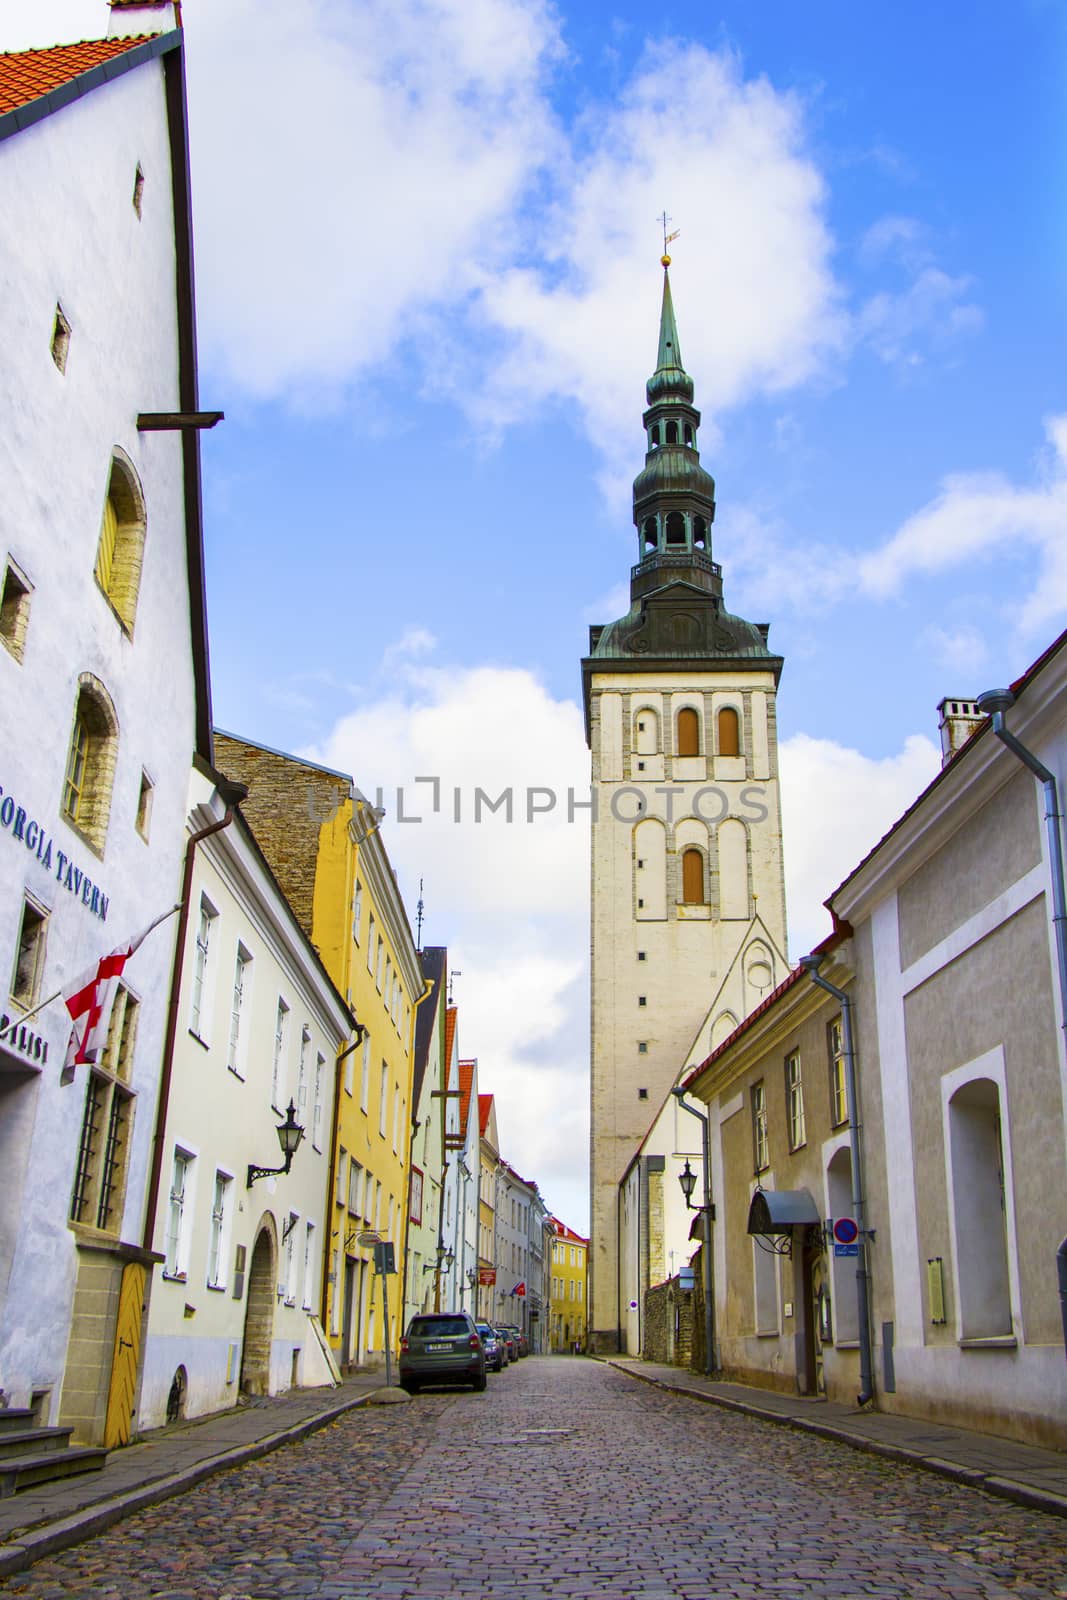 St. Nicholas' Church in Tallinn. The Estonian Evangelical Lutheral Church. Buildings and architecture exterior view in old town of Tallinn, colorful old style houses and street situation.